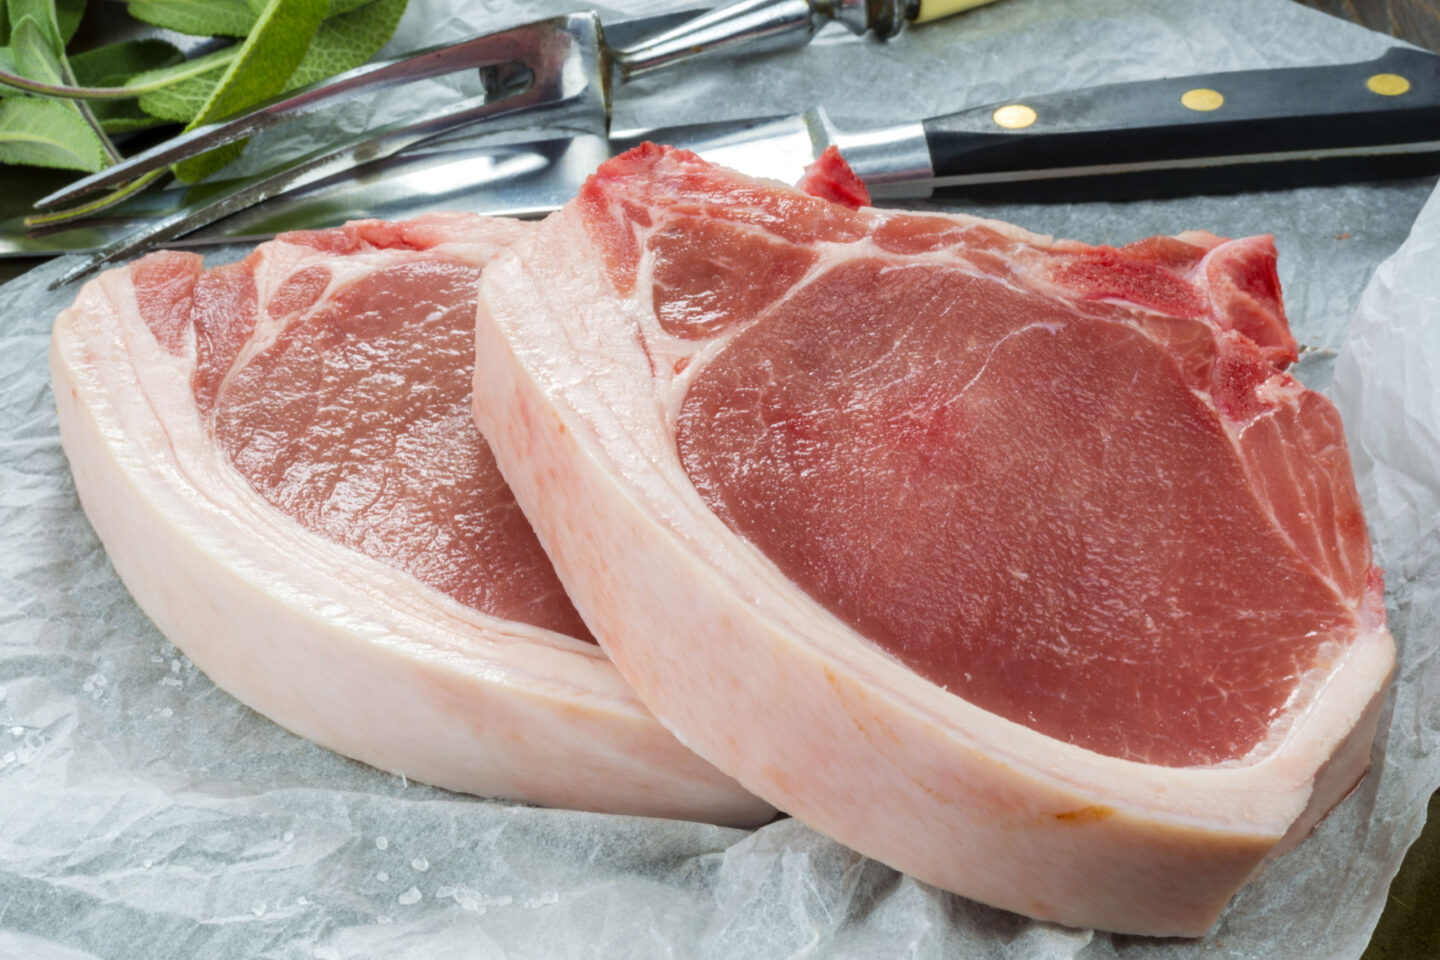 raw pork chops with carving knife and fork